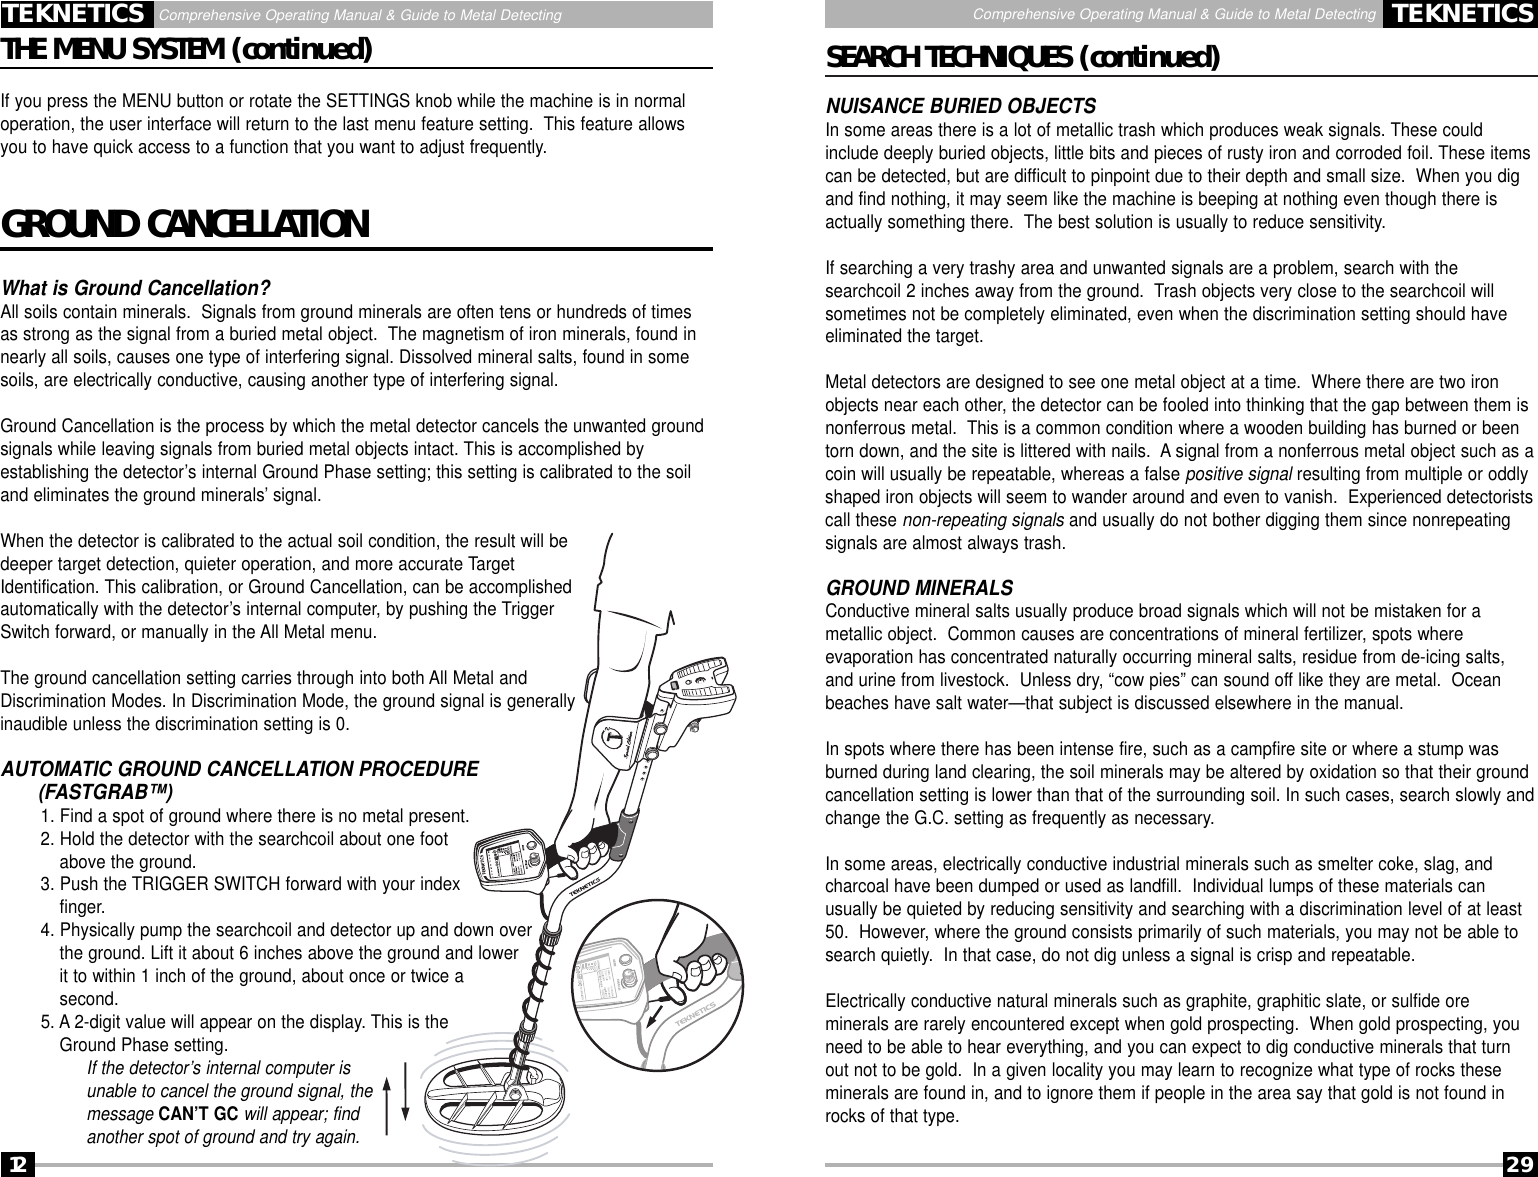 Page 29 of First Texas T2MD Professional Metal Detector User Manual Layout 1